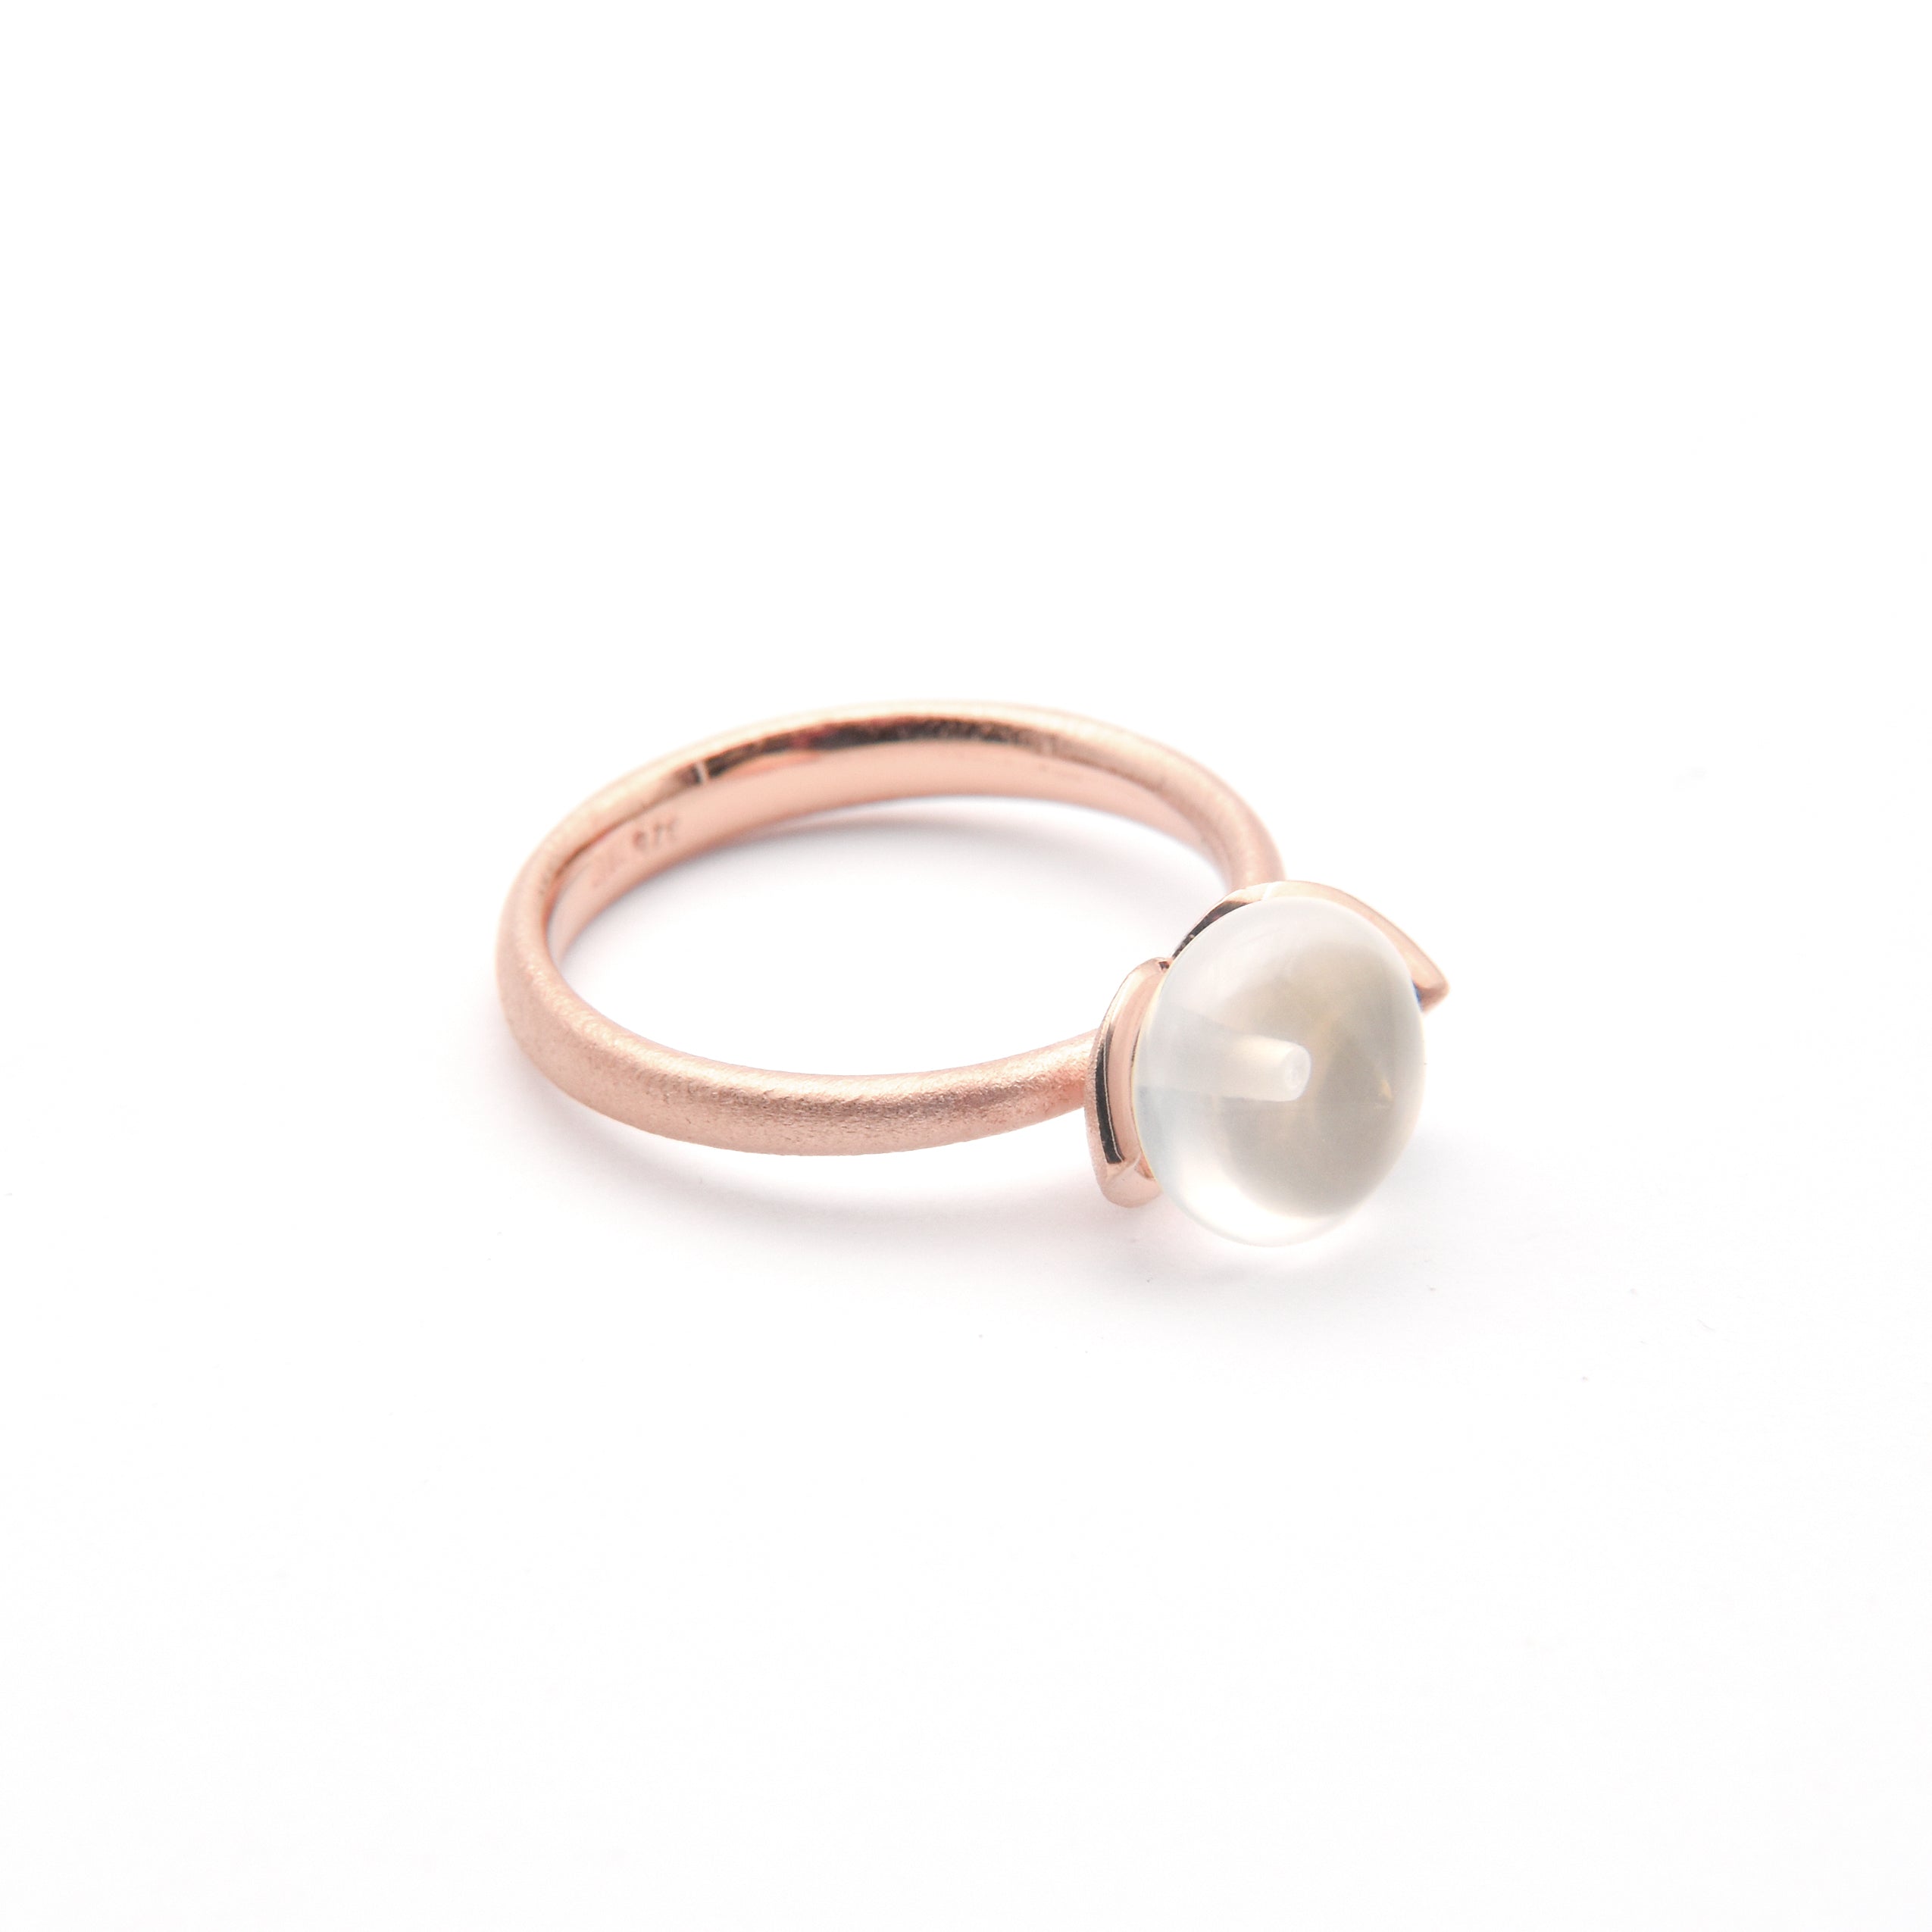 Dolce ring "smal" with milky quartz 925/-